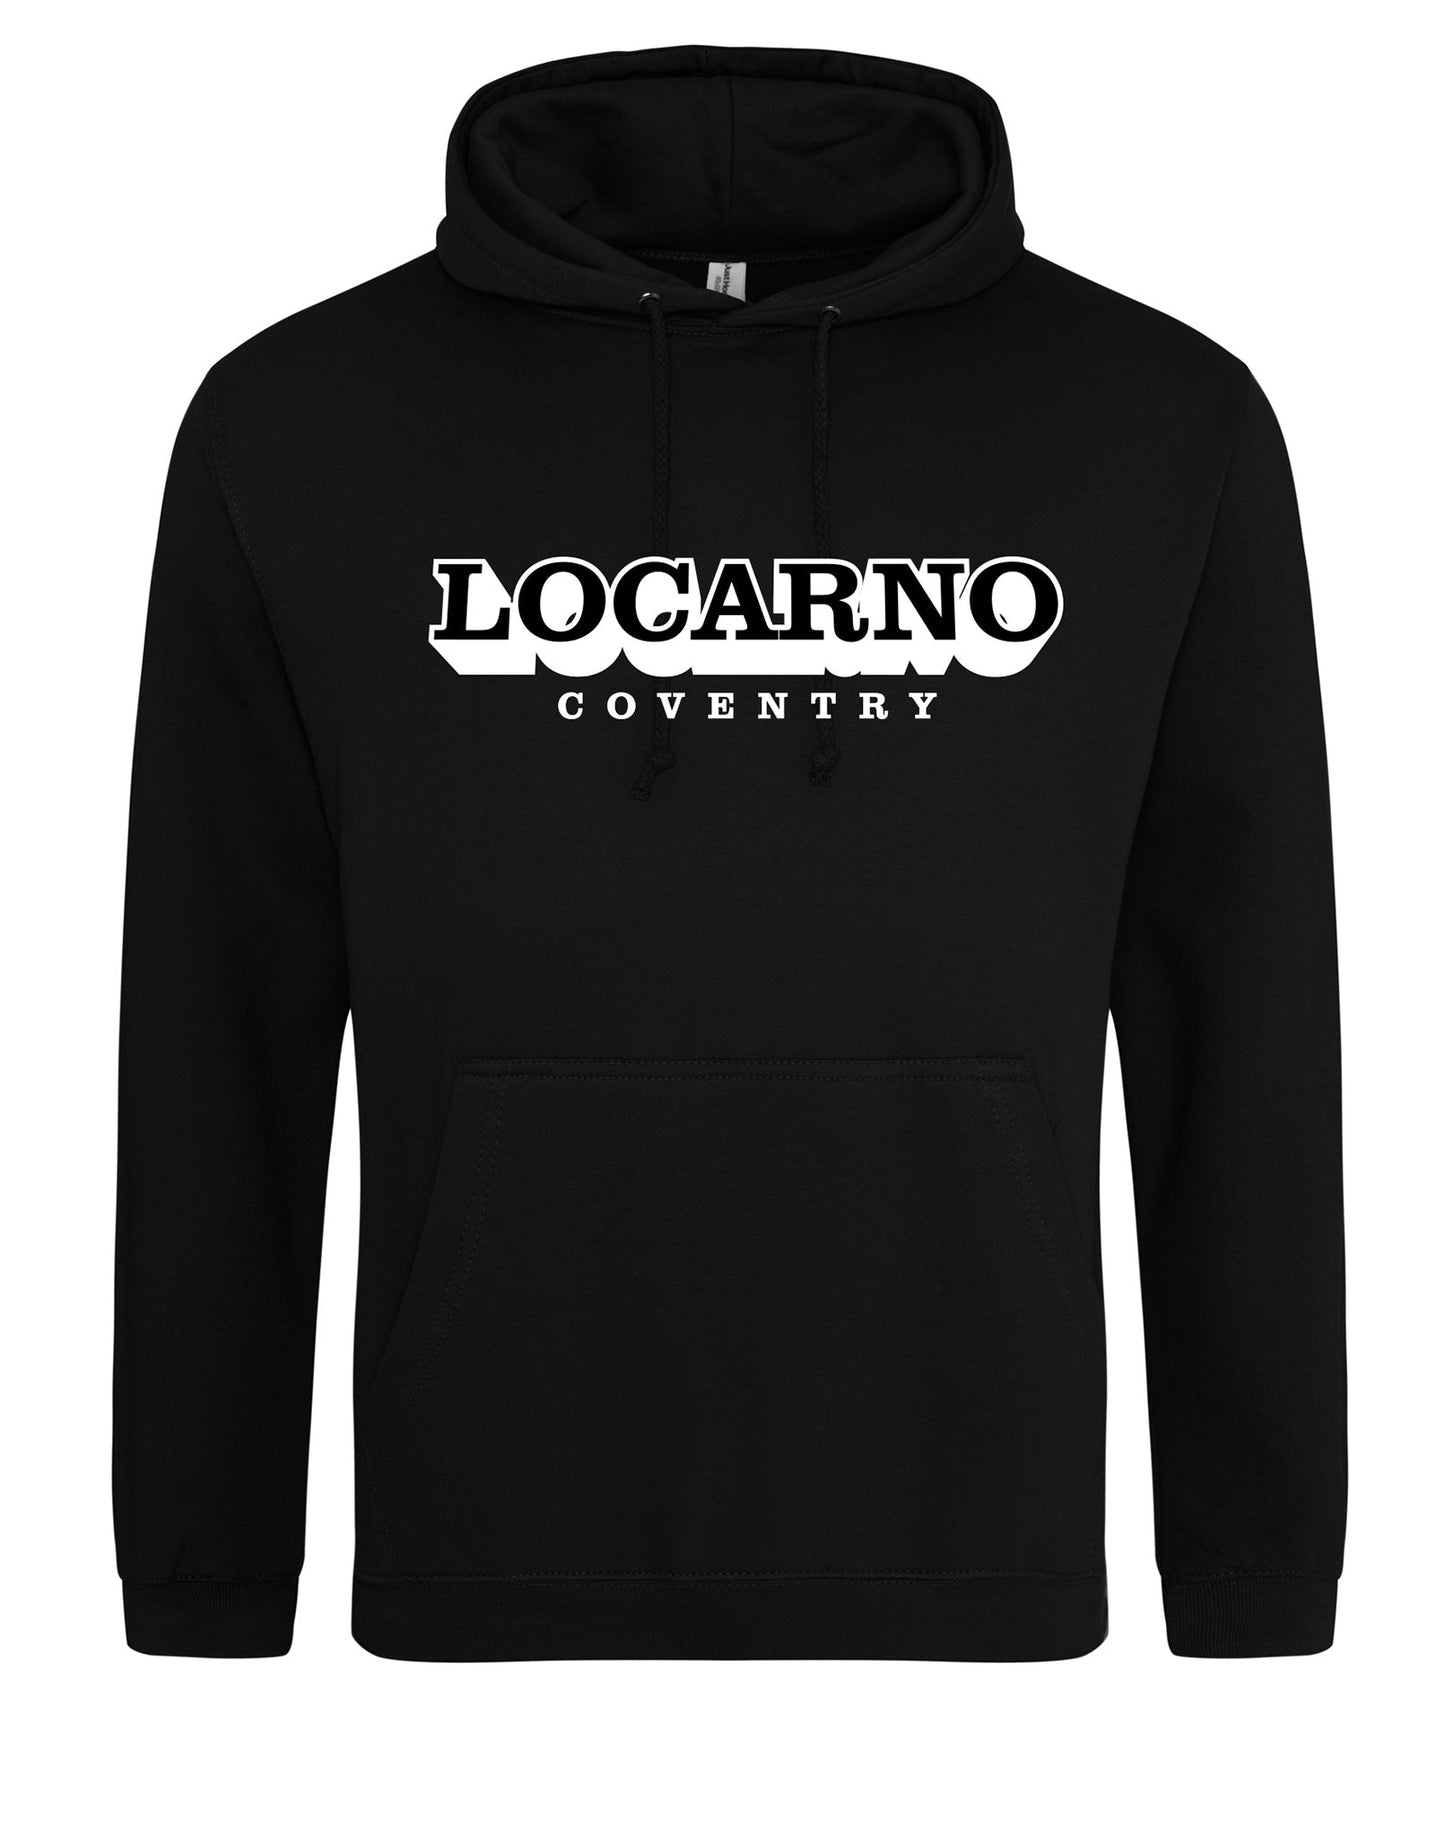 Locarno - Coventry - unisex fit hoodie - various colours - Dirty Stop Outs